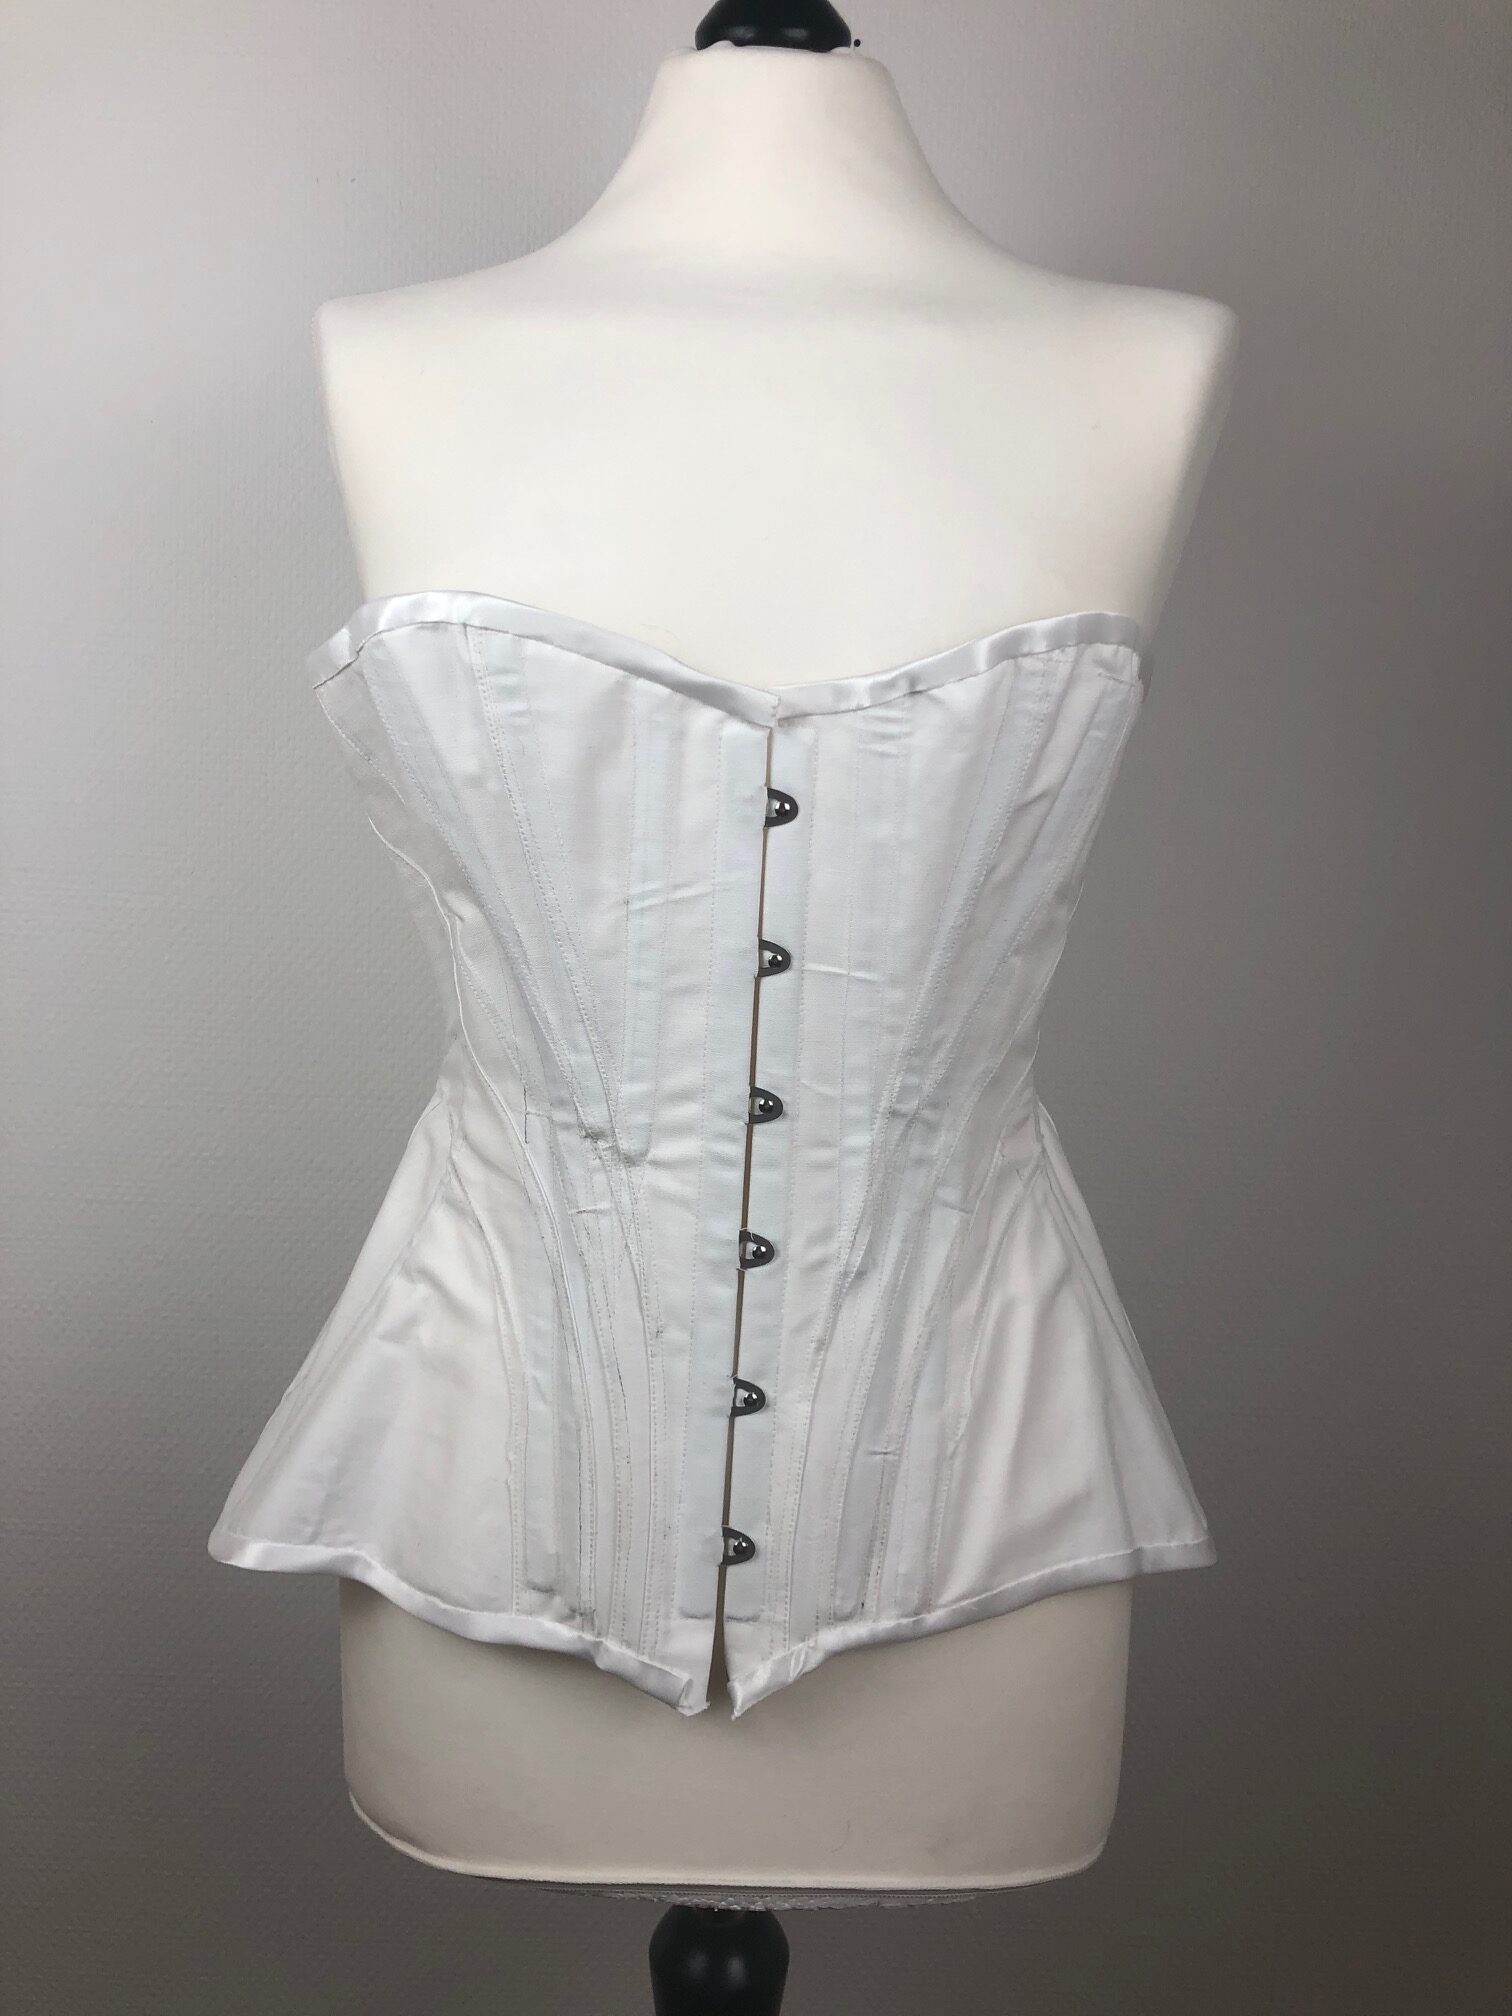 CORSET TOP TUTORIAL : Pattern drafting, cutting and sewing